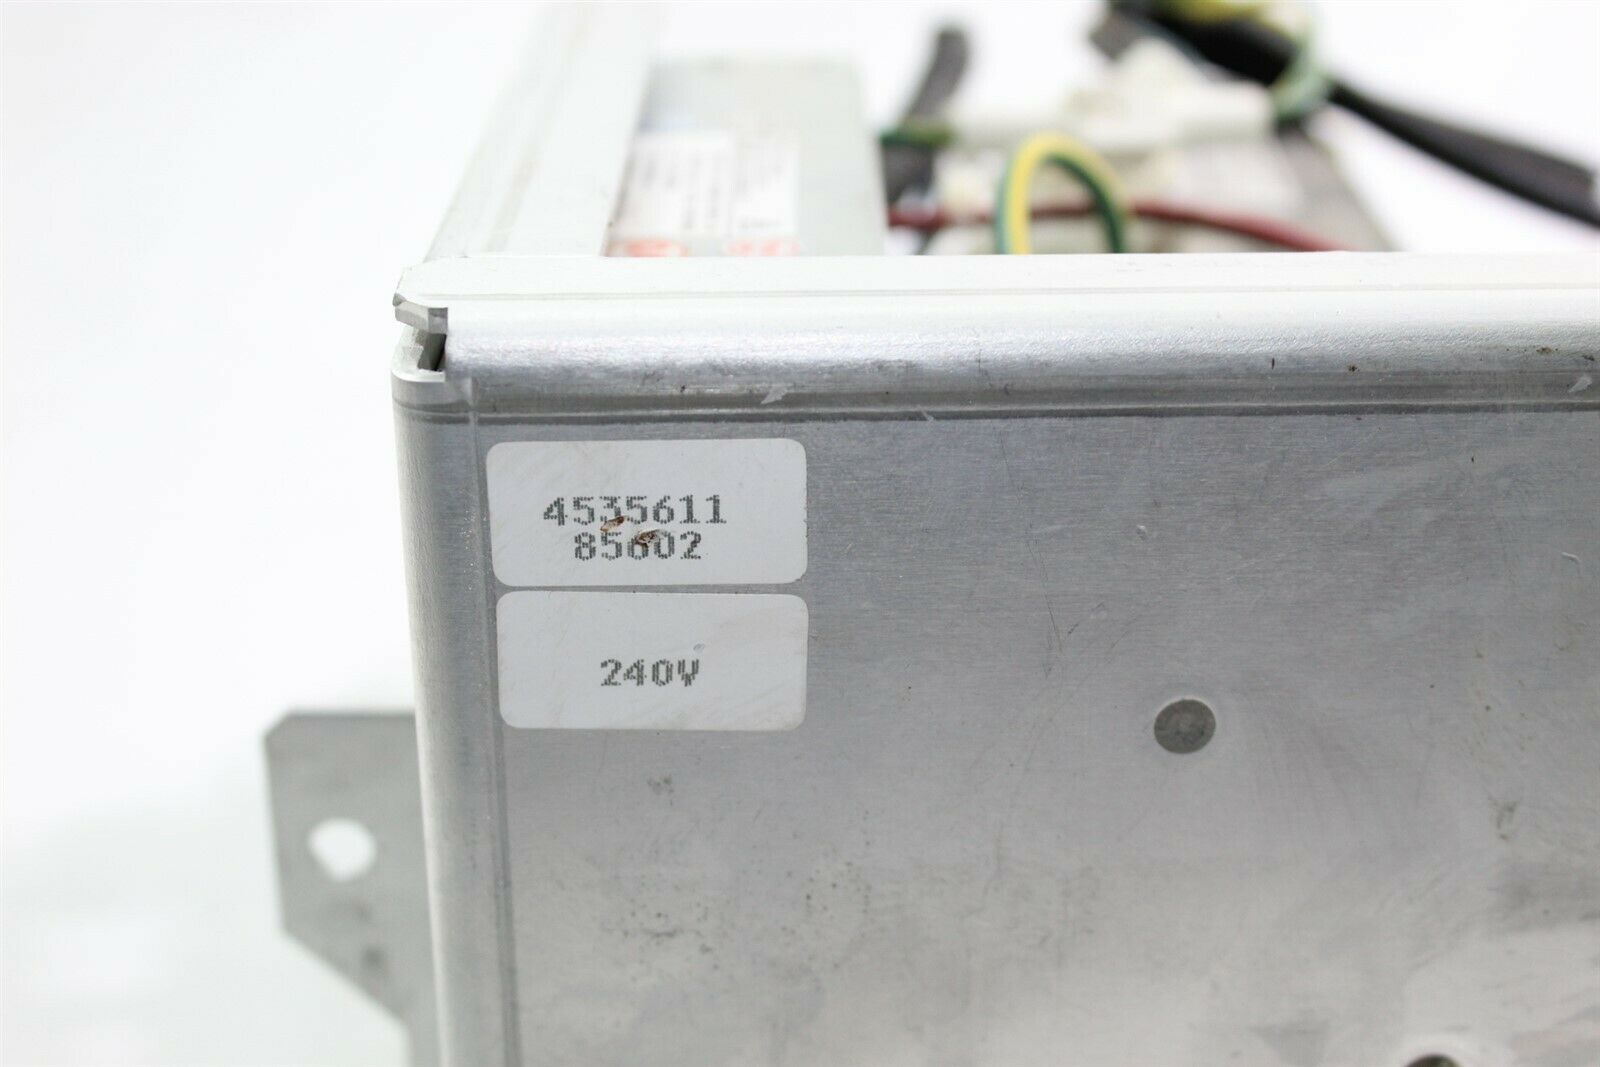 Philips IU22 IE33 Ultrasound Power Supply Module 453561185602 Configured to 240V DIAGNOSTIC ULTRASOUND MACHINES FOR SALE